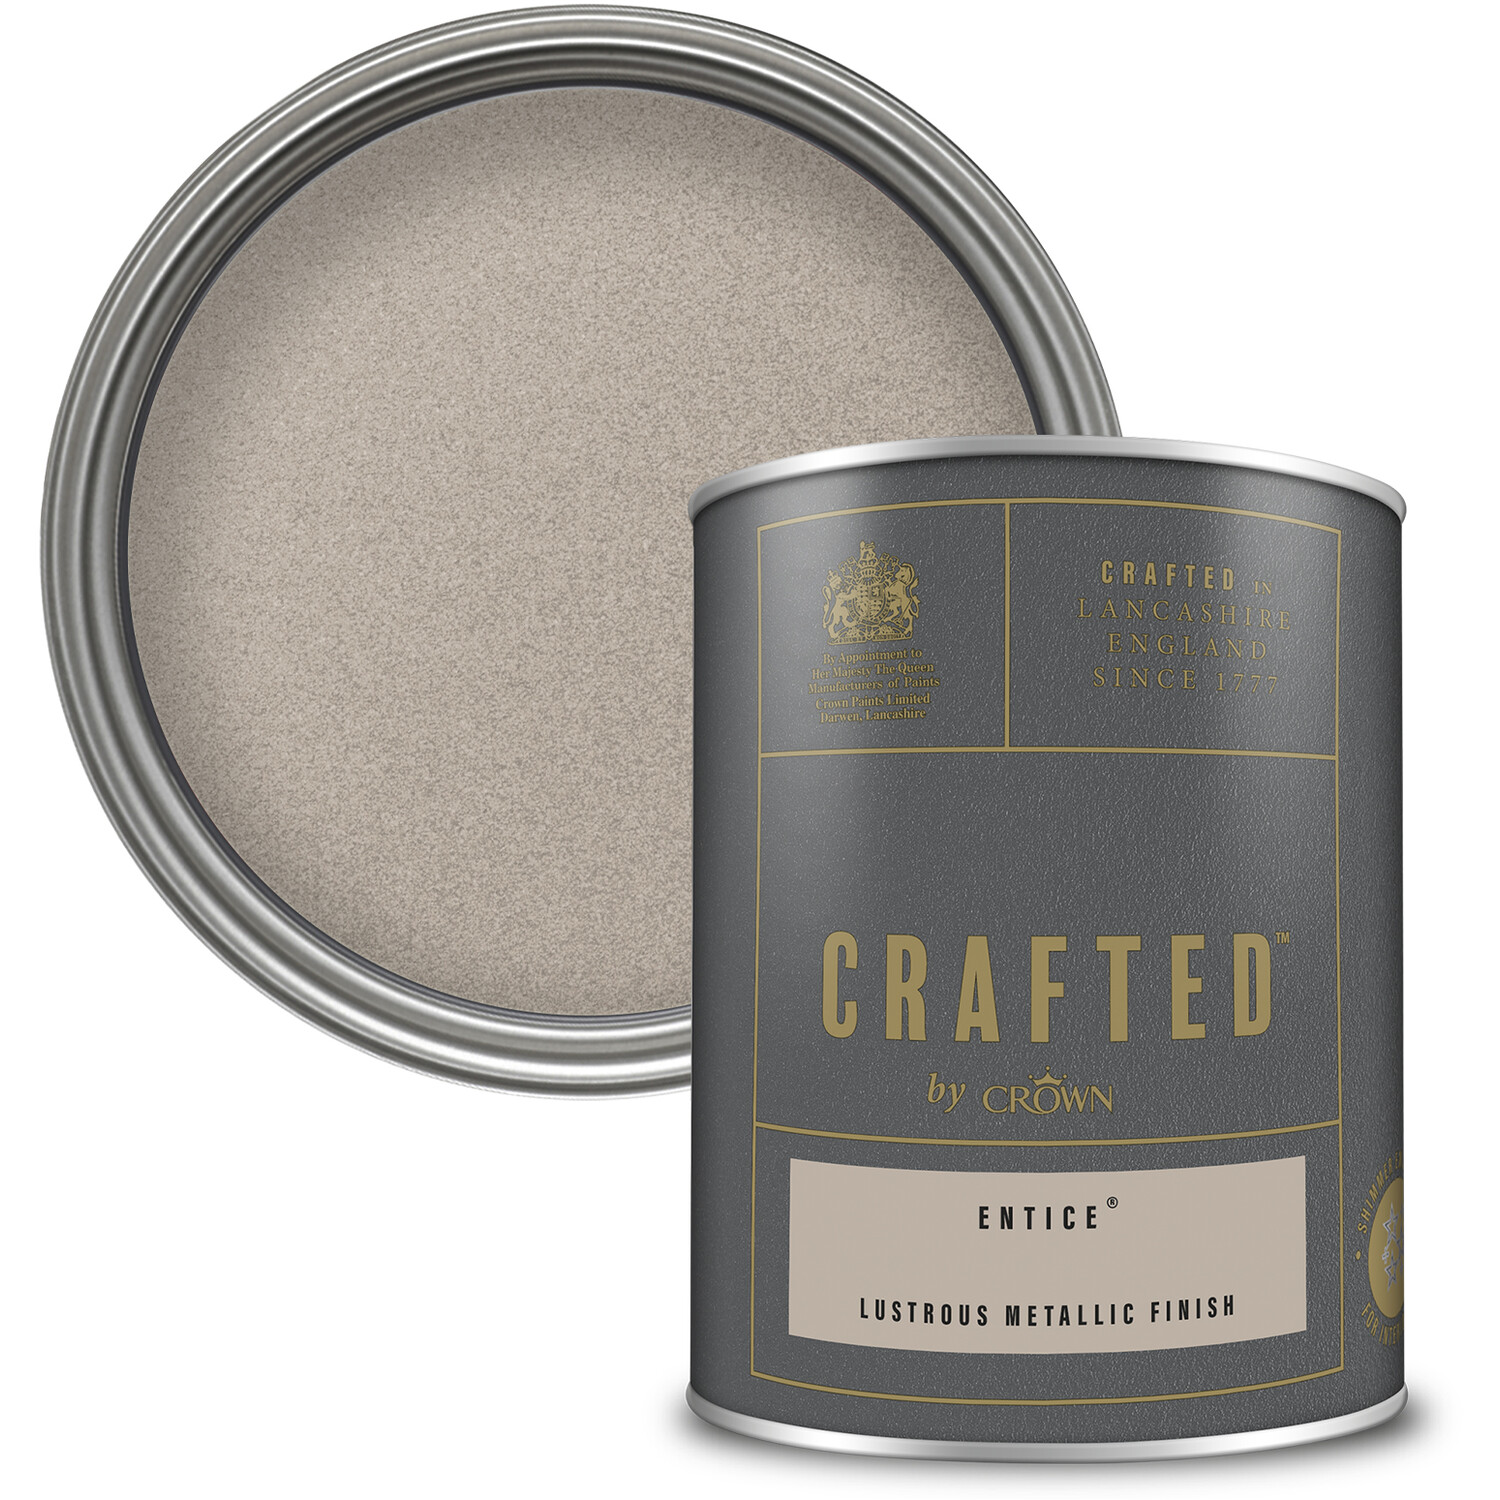 Crown Crafted Walls Wood and Metal Entice Lustrous Metallic Shimmer Emulsion Paint 1.25L Image 1